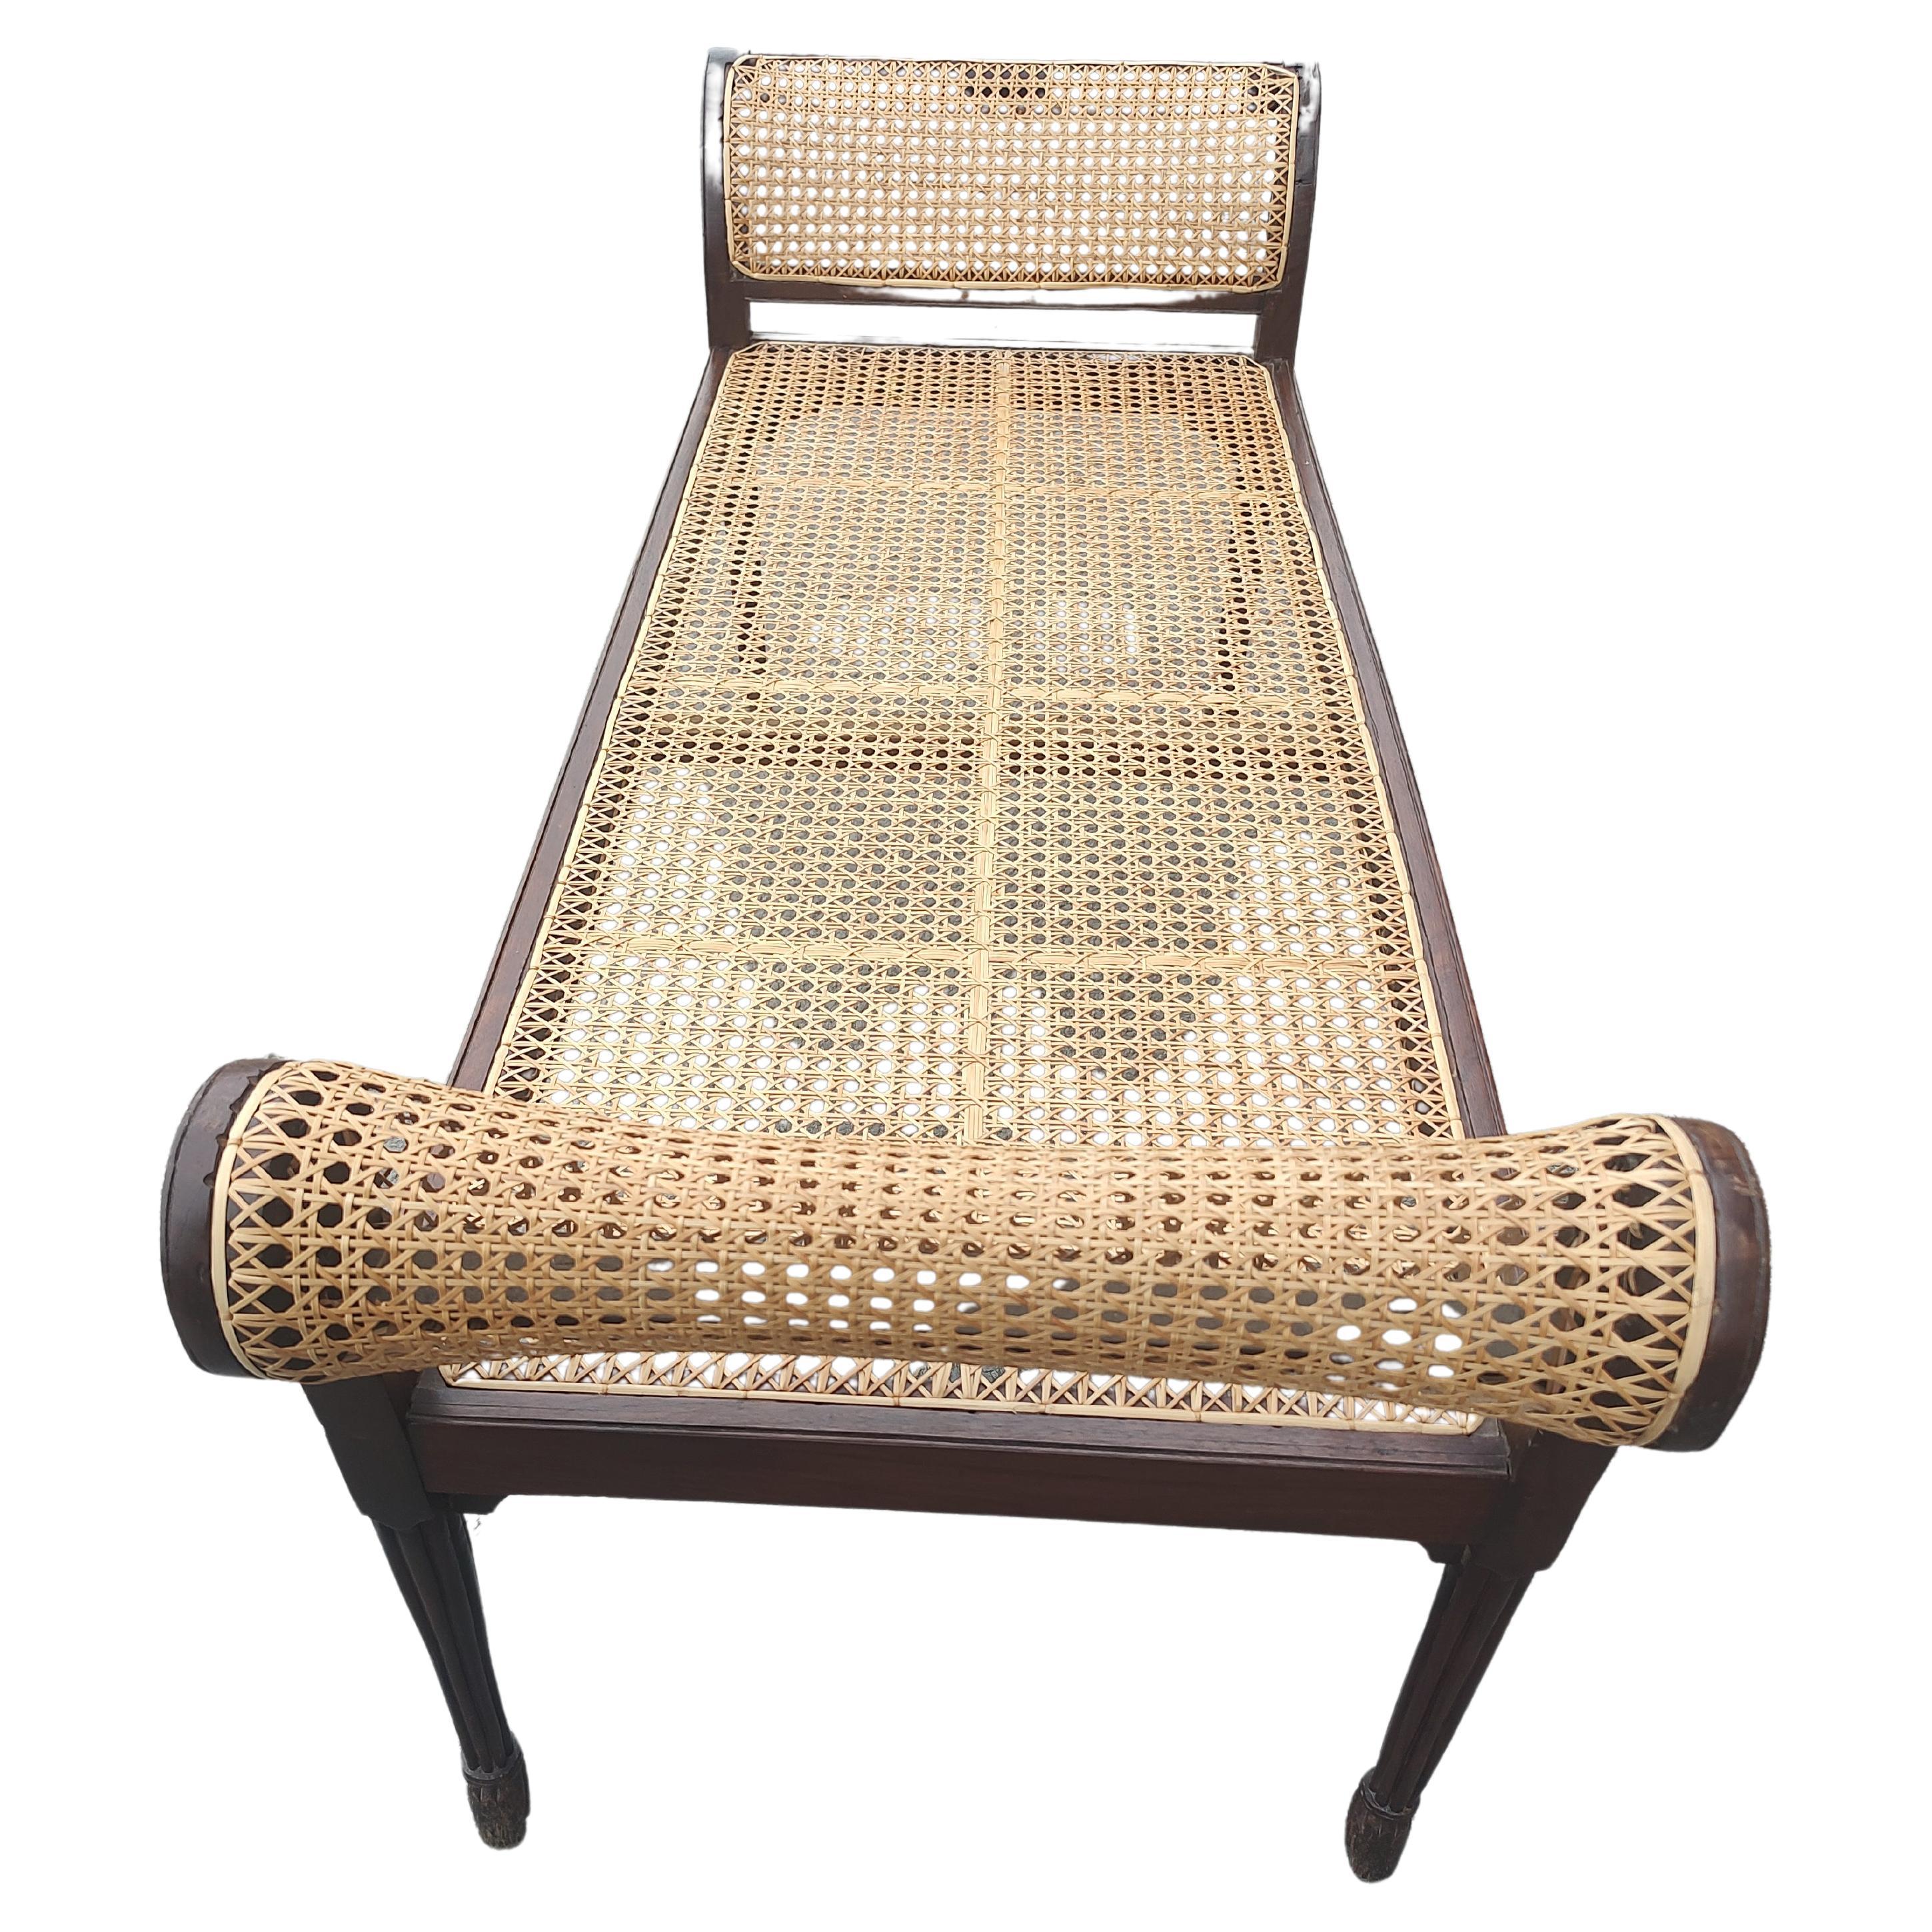 19thC English Regency Caned Recamier Style Window Seat with Reeded legs Mahogany For Sale 4